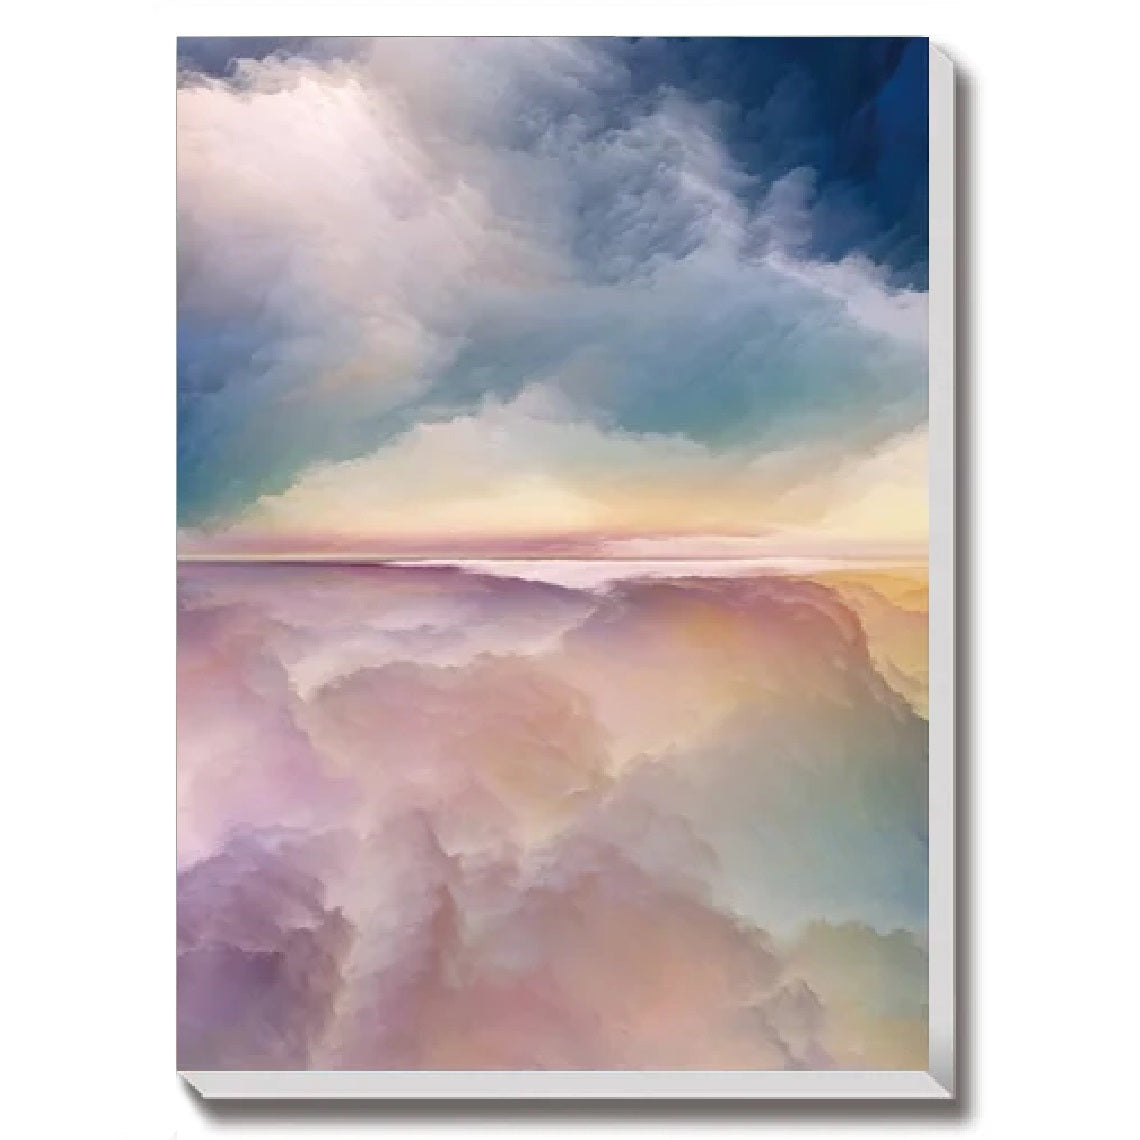 Abstract Cloud Storm (Purple Tone) Fantastic Landscape Canvas Wall Art, Vivid Color Oil Painting for Wall Decor, Set of 3 Panels or 1 Panorama View